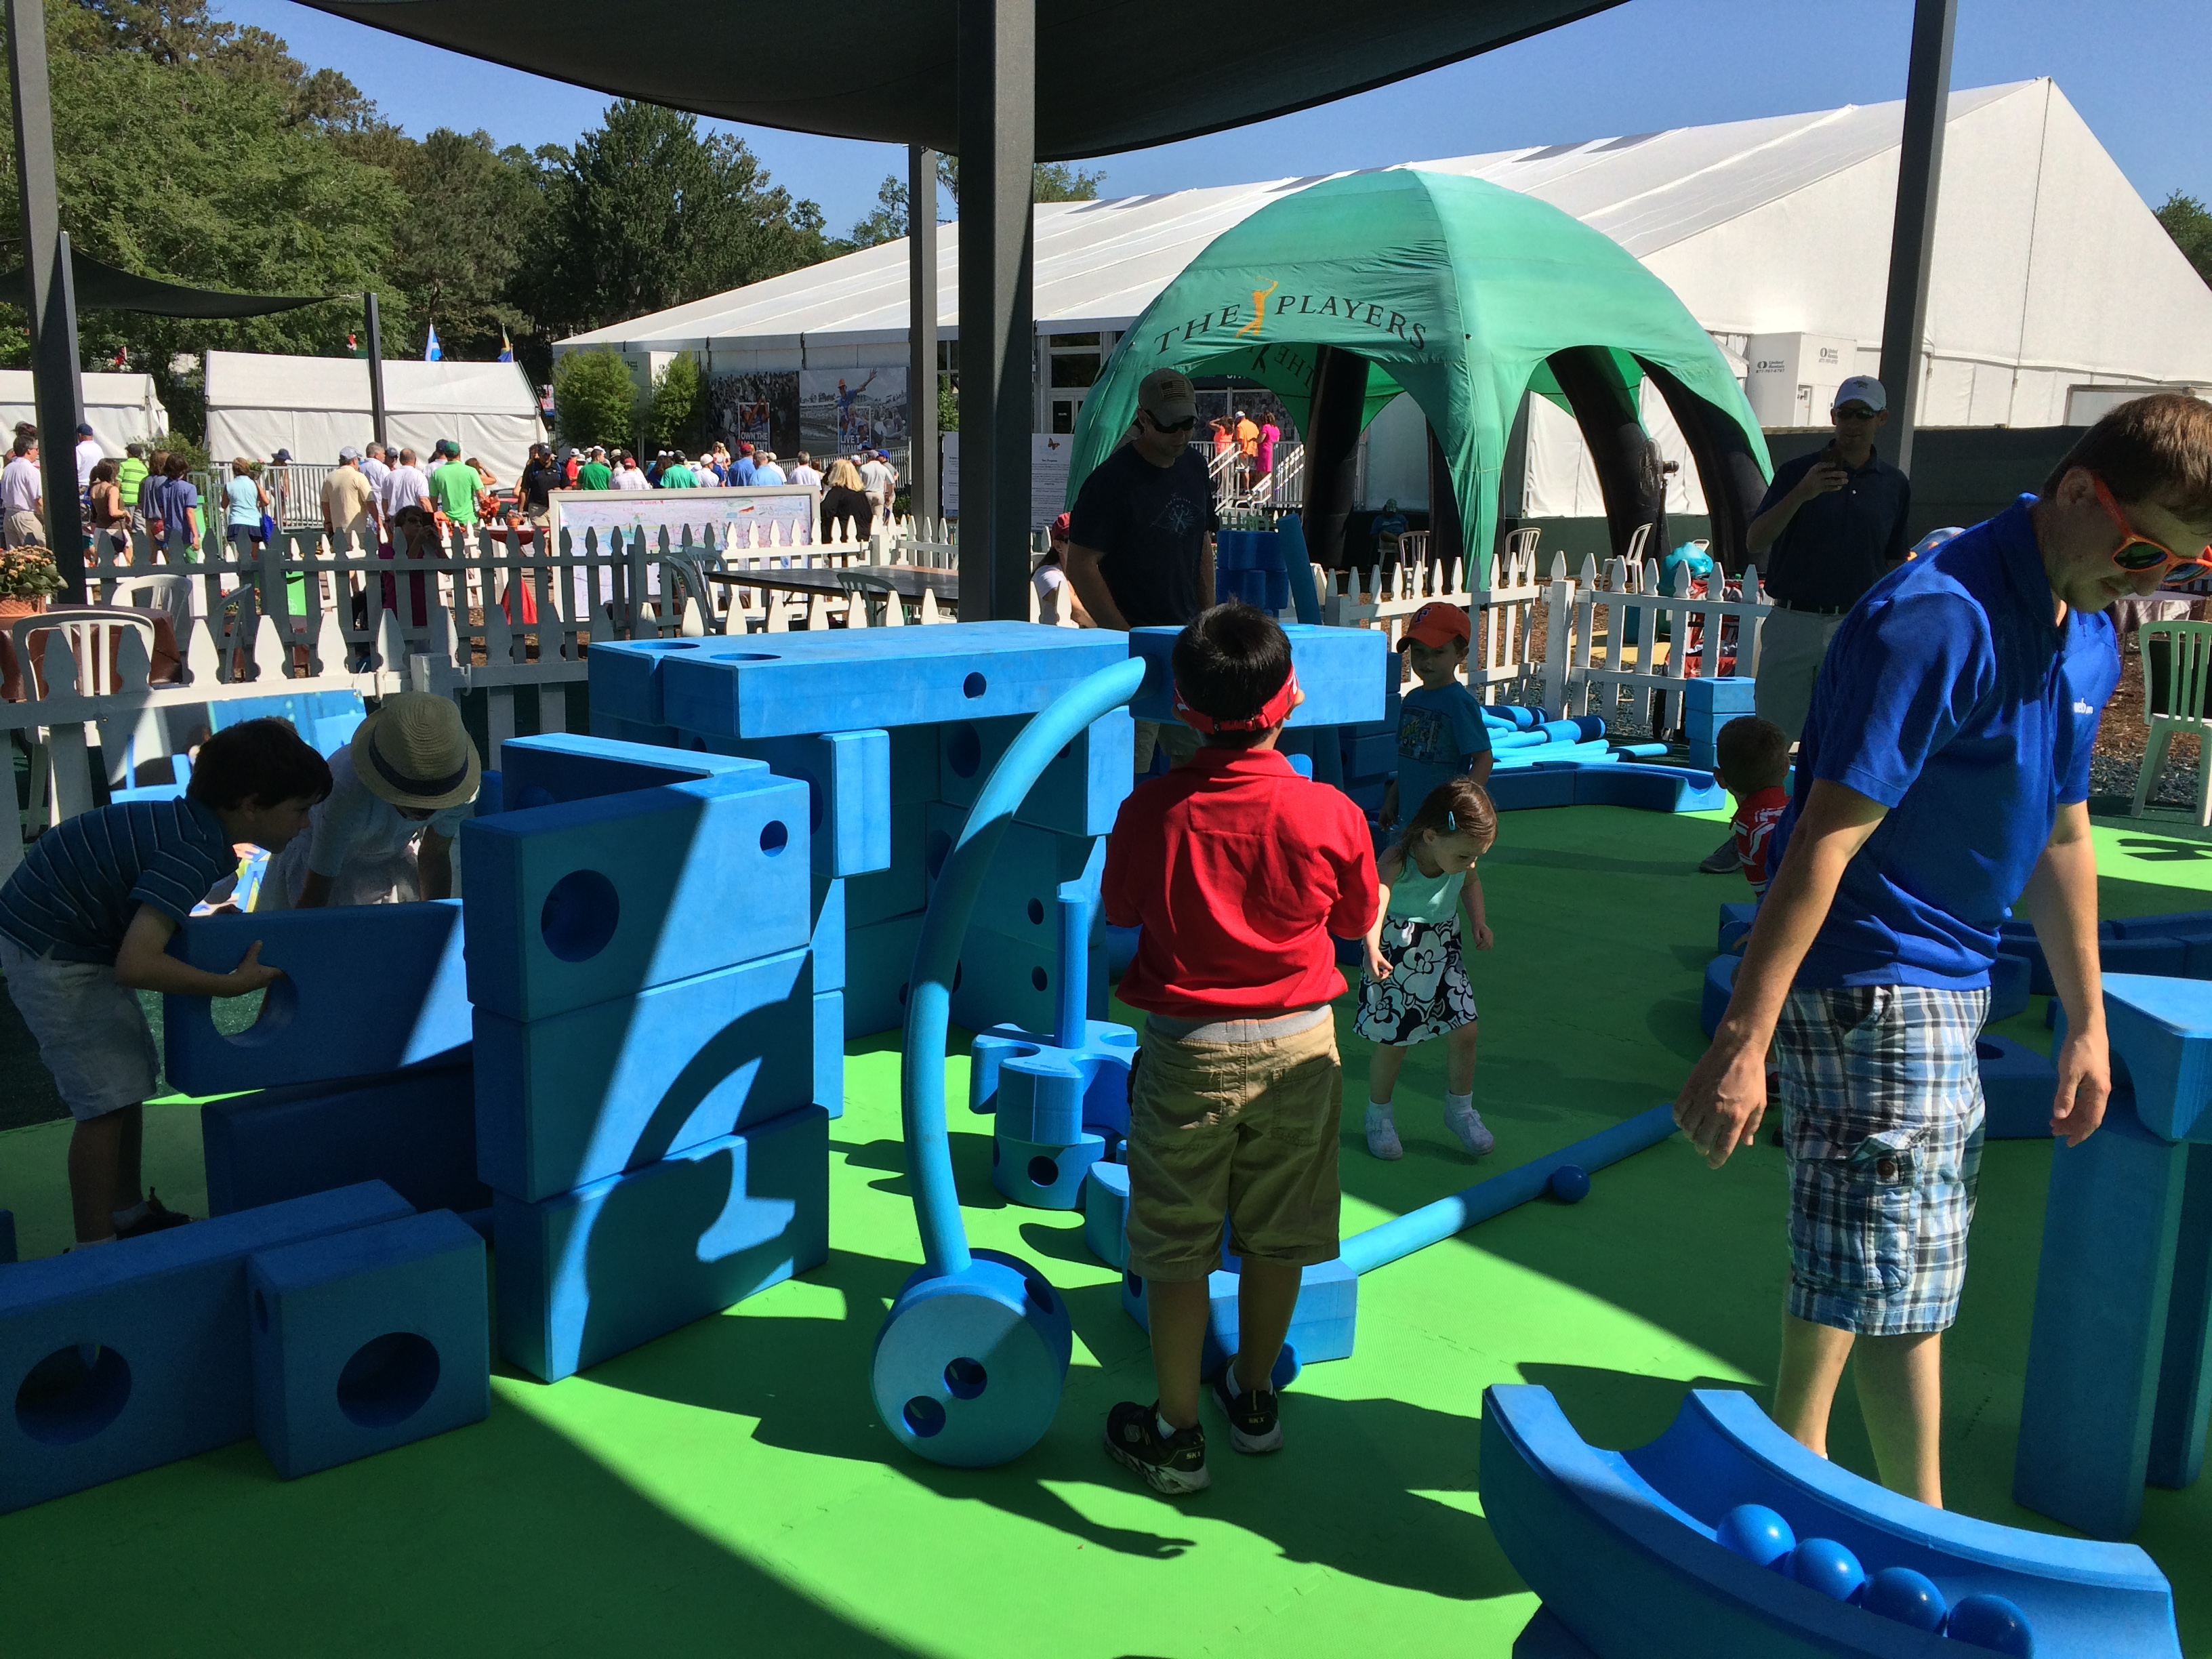 At the championship, Imagination Playground partnered with THE PLAYERS to offer a family and kid-friendly Big Blue Block building oasis, located in the McKenzie Noelle Wilson Foundation Kid Zone.